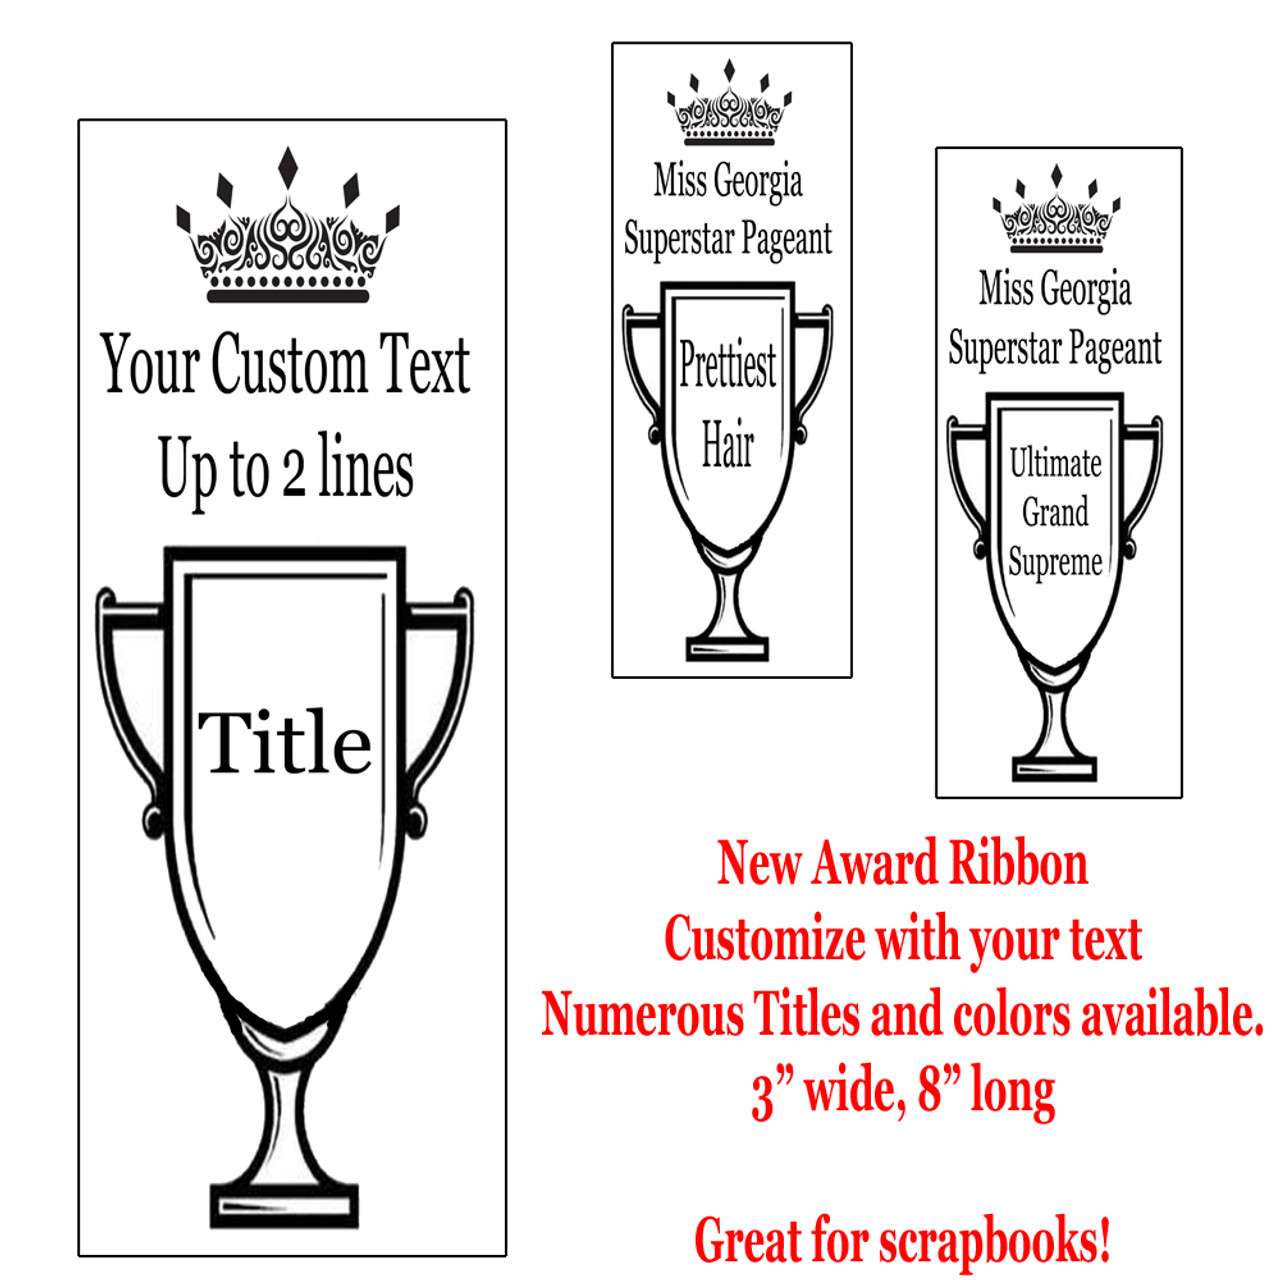 New Printed Award Ribbon - Available in multiple colors and titles.  Customize with your text. - Premier Crowns and Awards